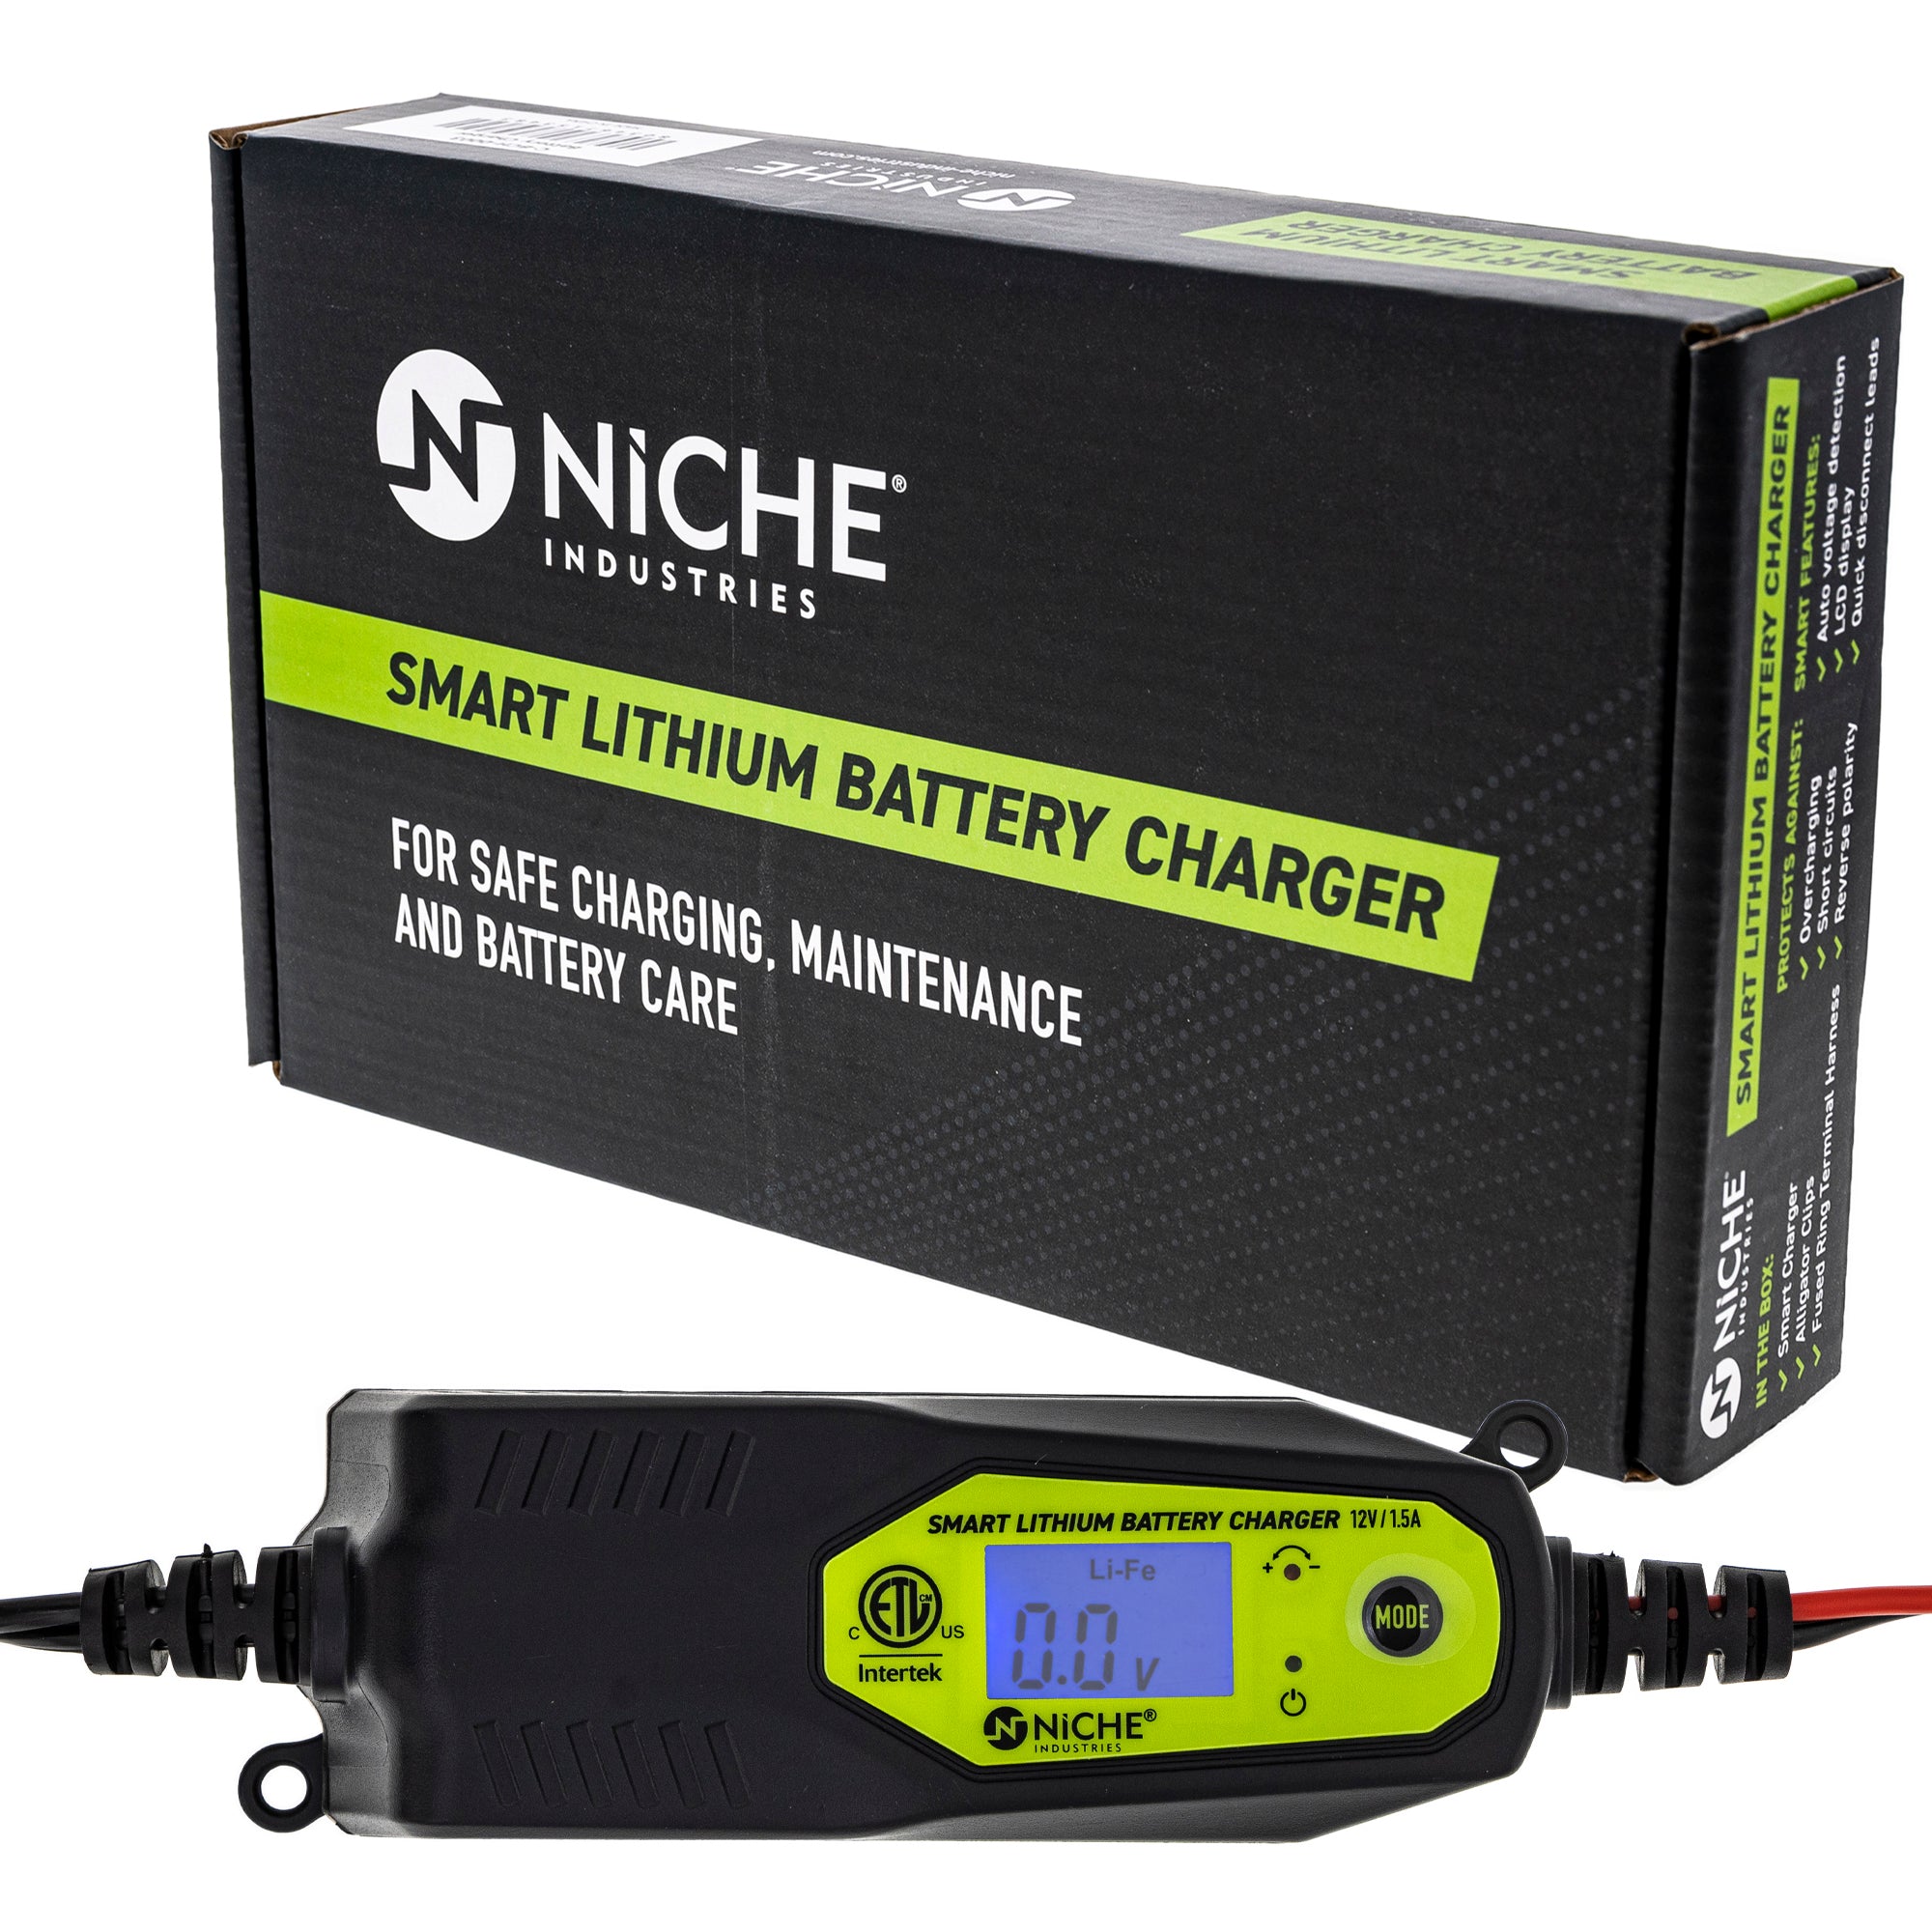 NICHE Charger